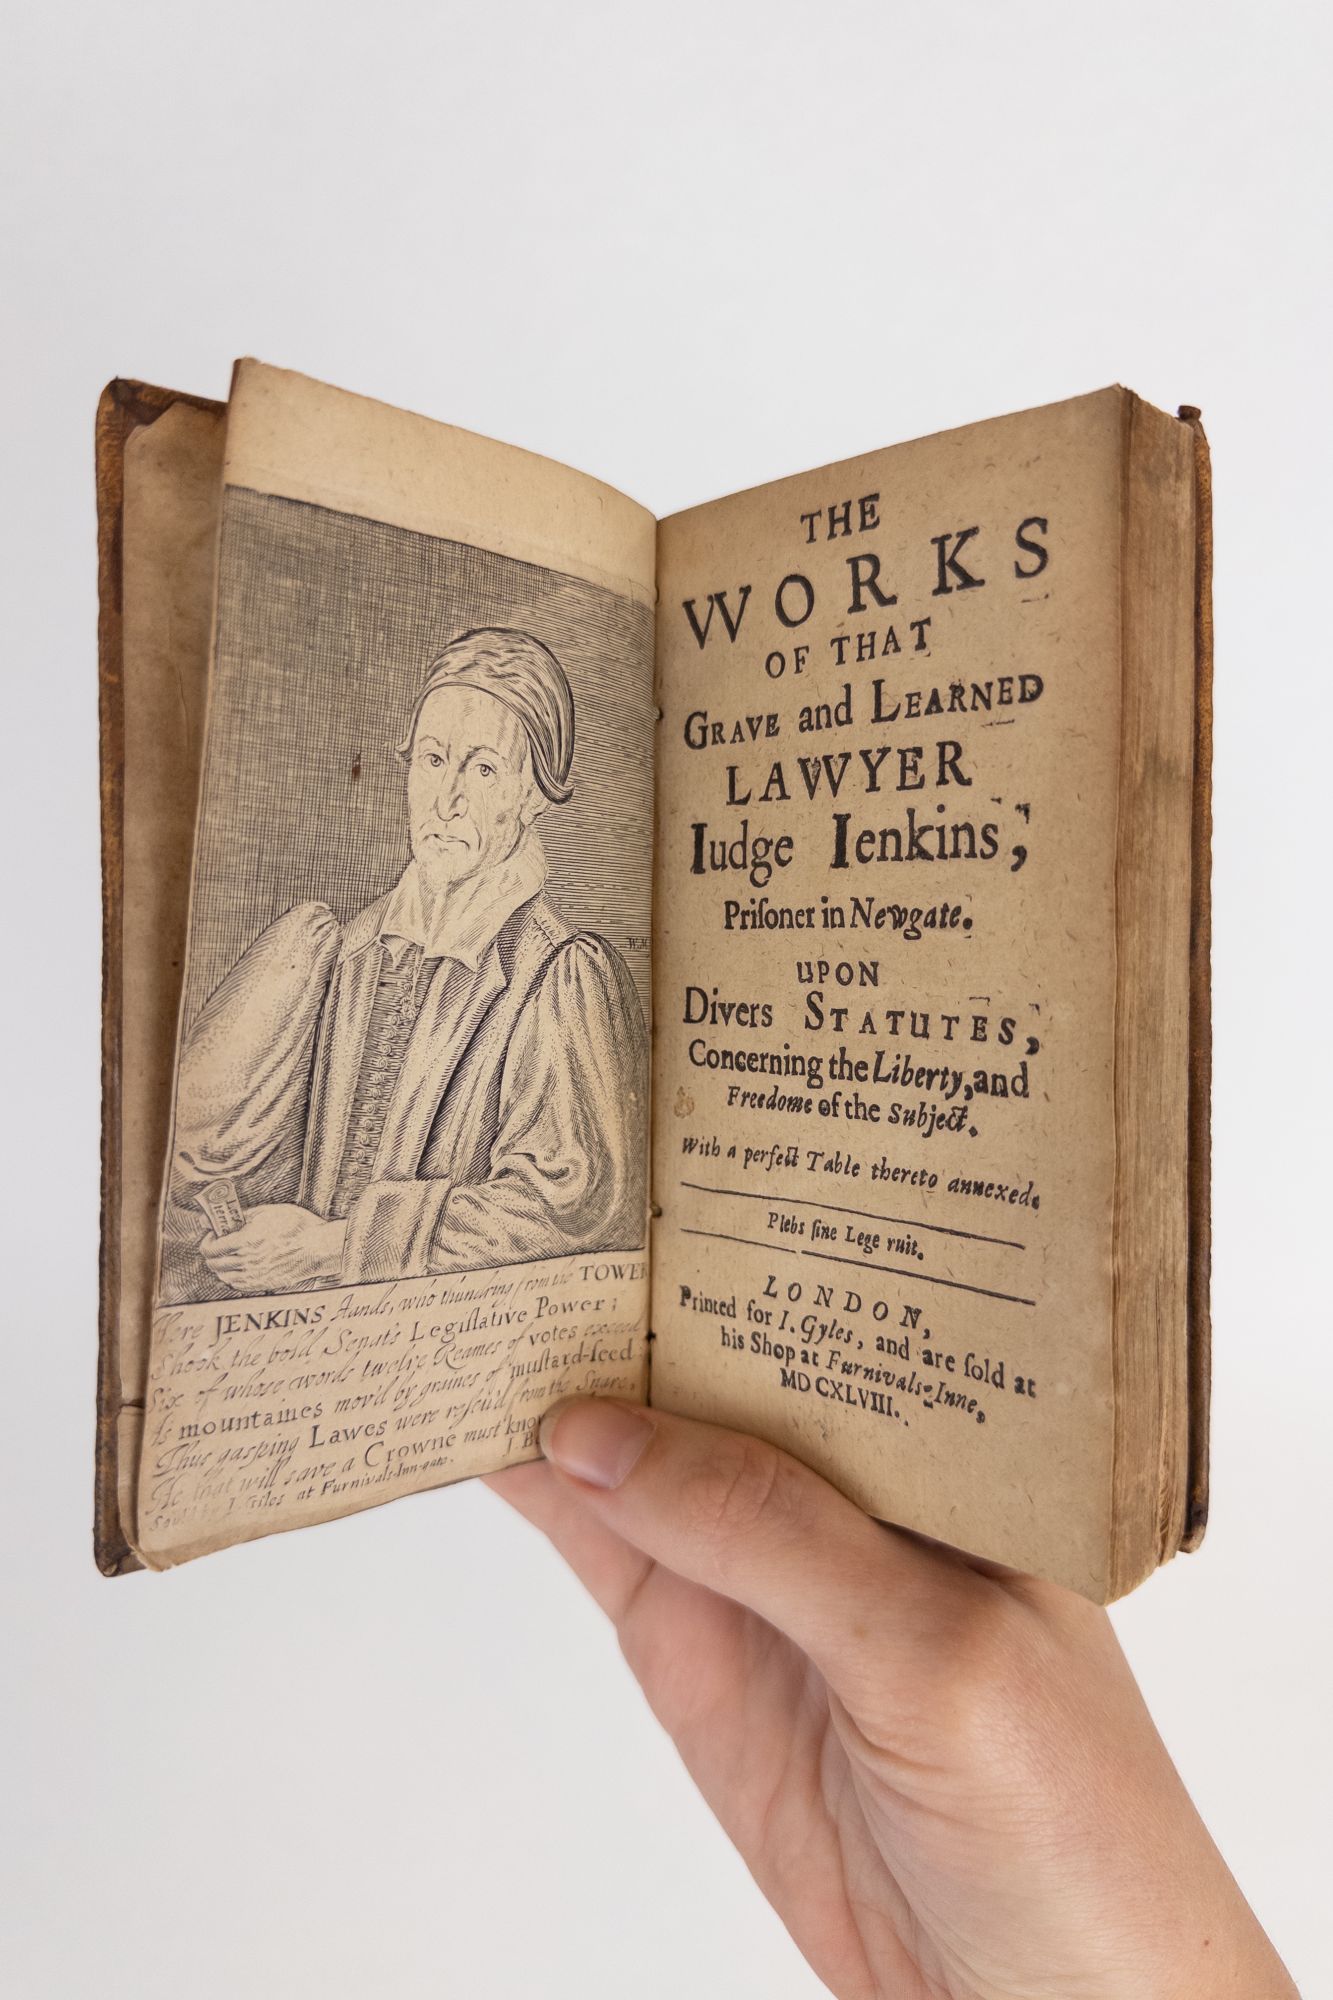 Product Image for THE WORKS OF THAT GRAVE AND LEARNED LAWYER IUDGE IENKINS, PRISONER IN NEWGATE